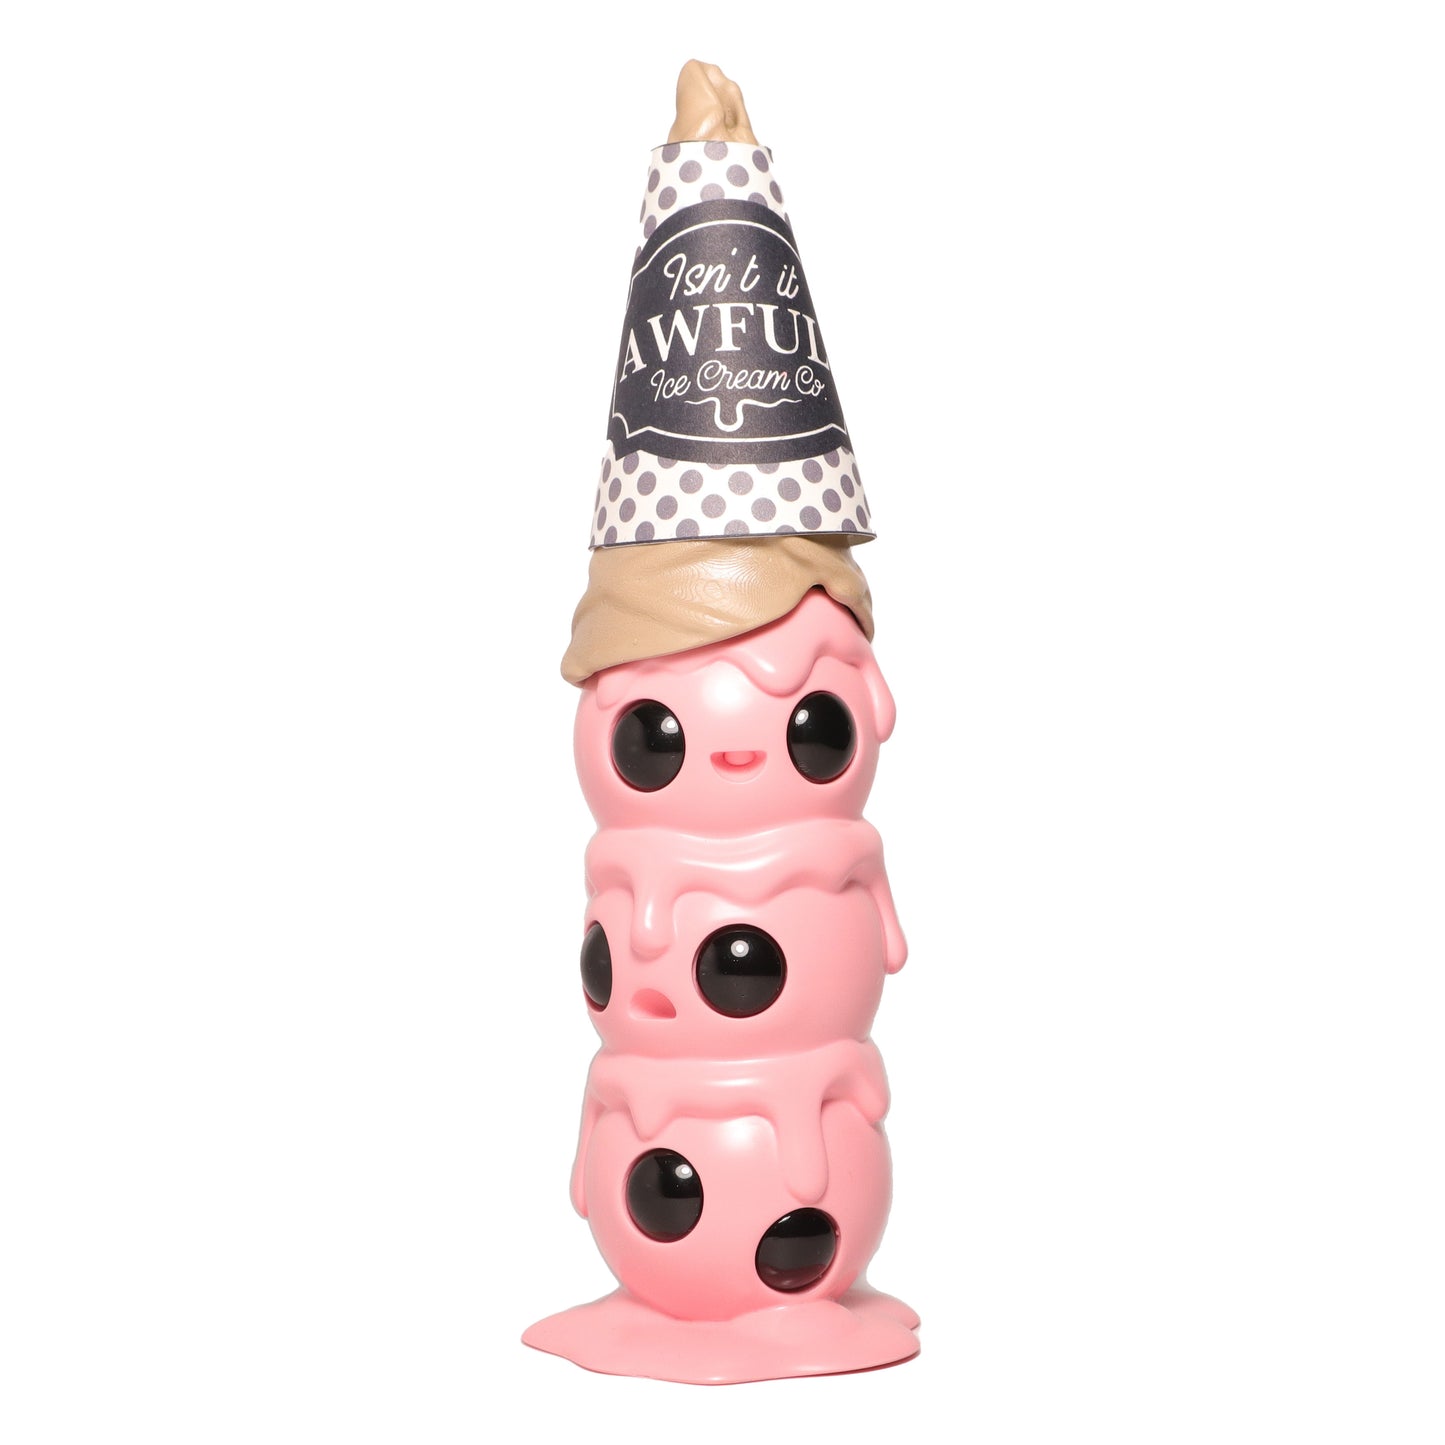 This is Wafull Strawberry Shakeup Limited Edition Resin Figure